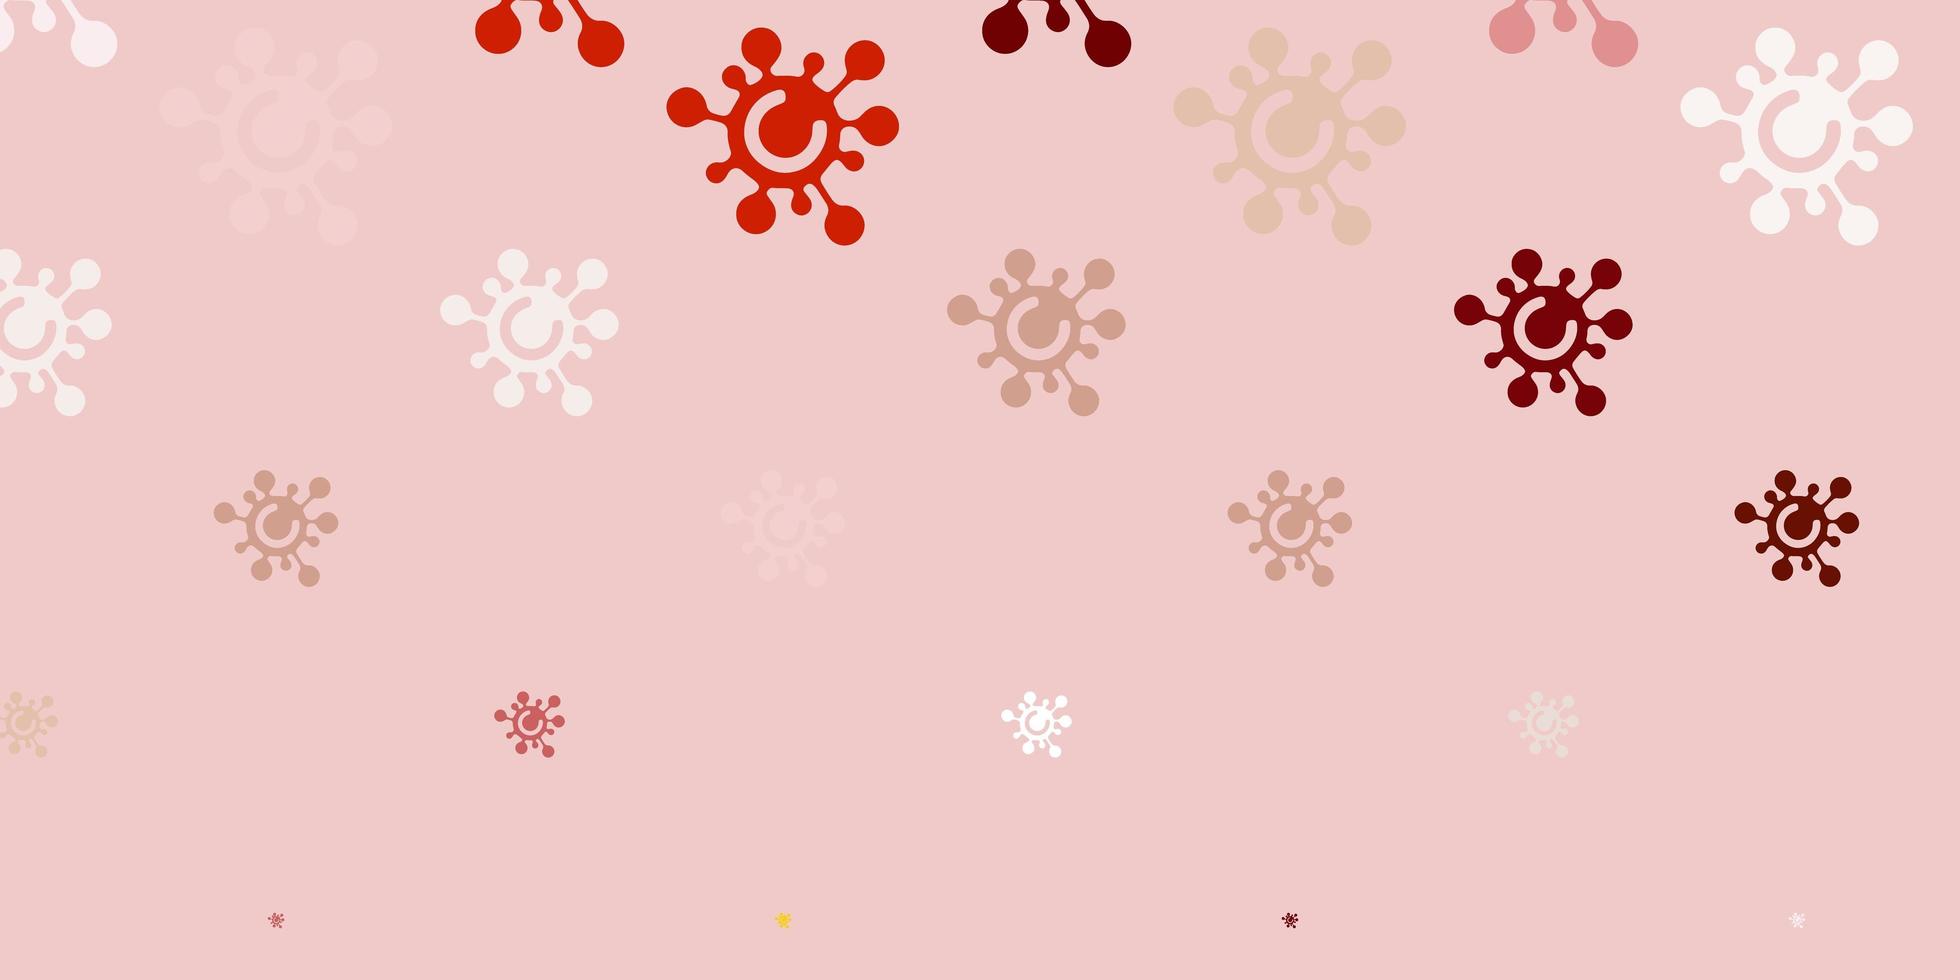 Light red template with flu signs. vector